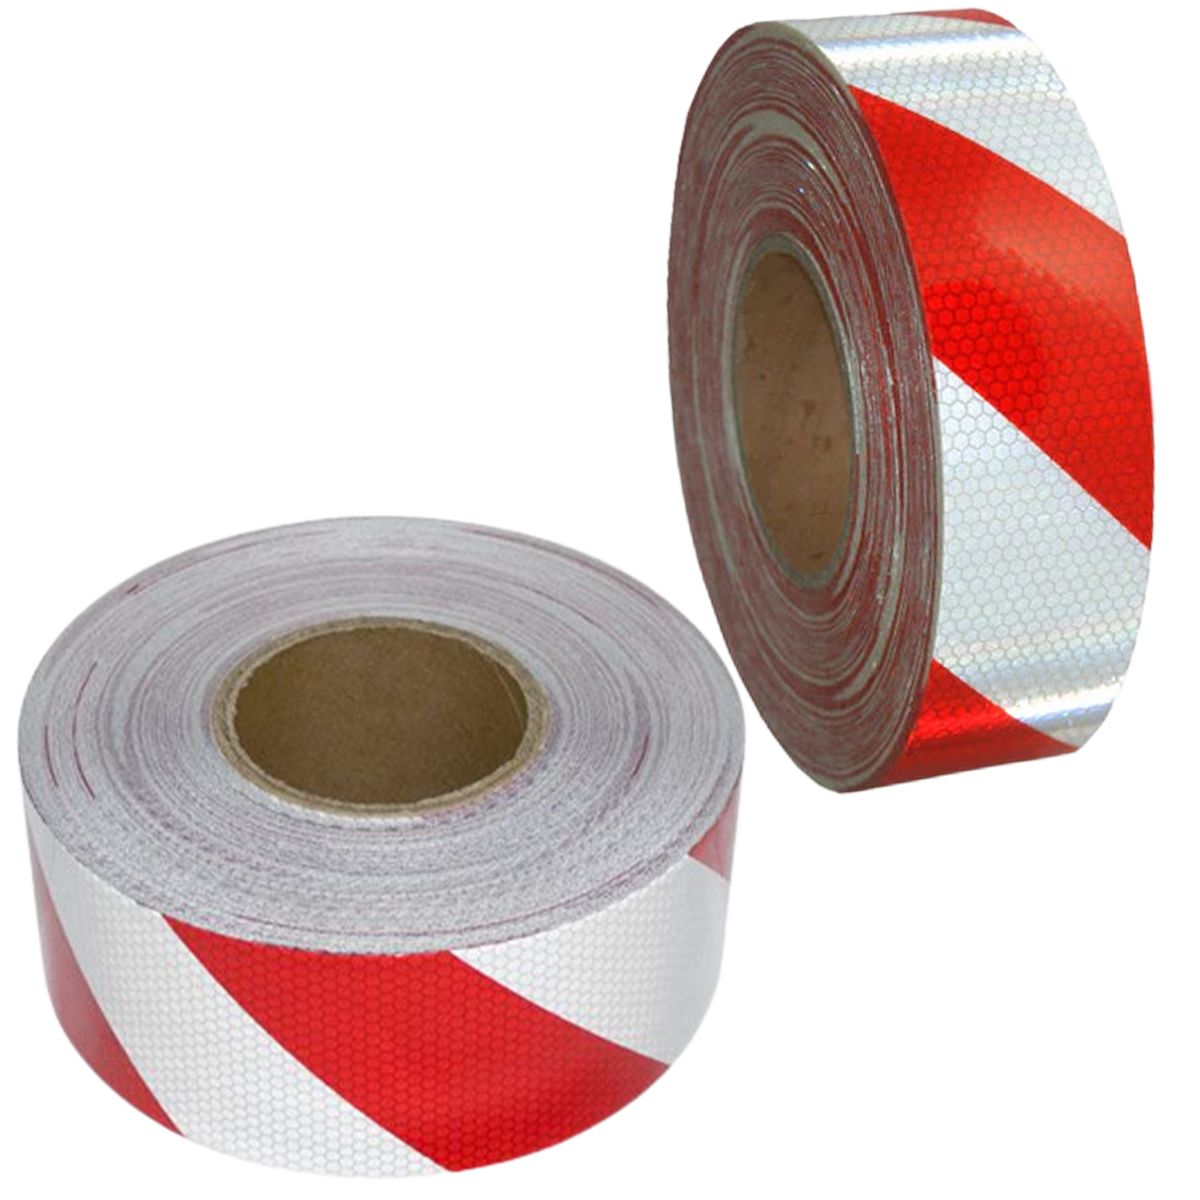 Red and White High Class 1 Reflective Tape | K2K Signs Australia